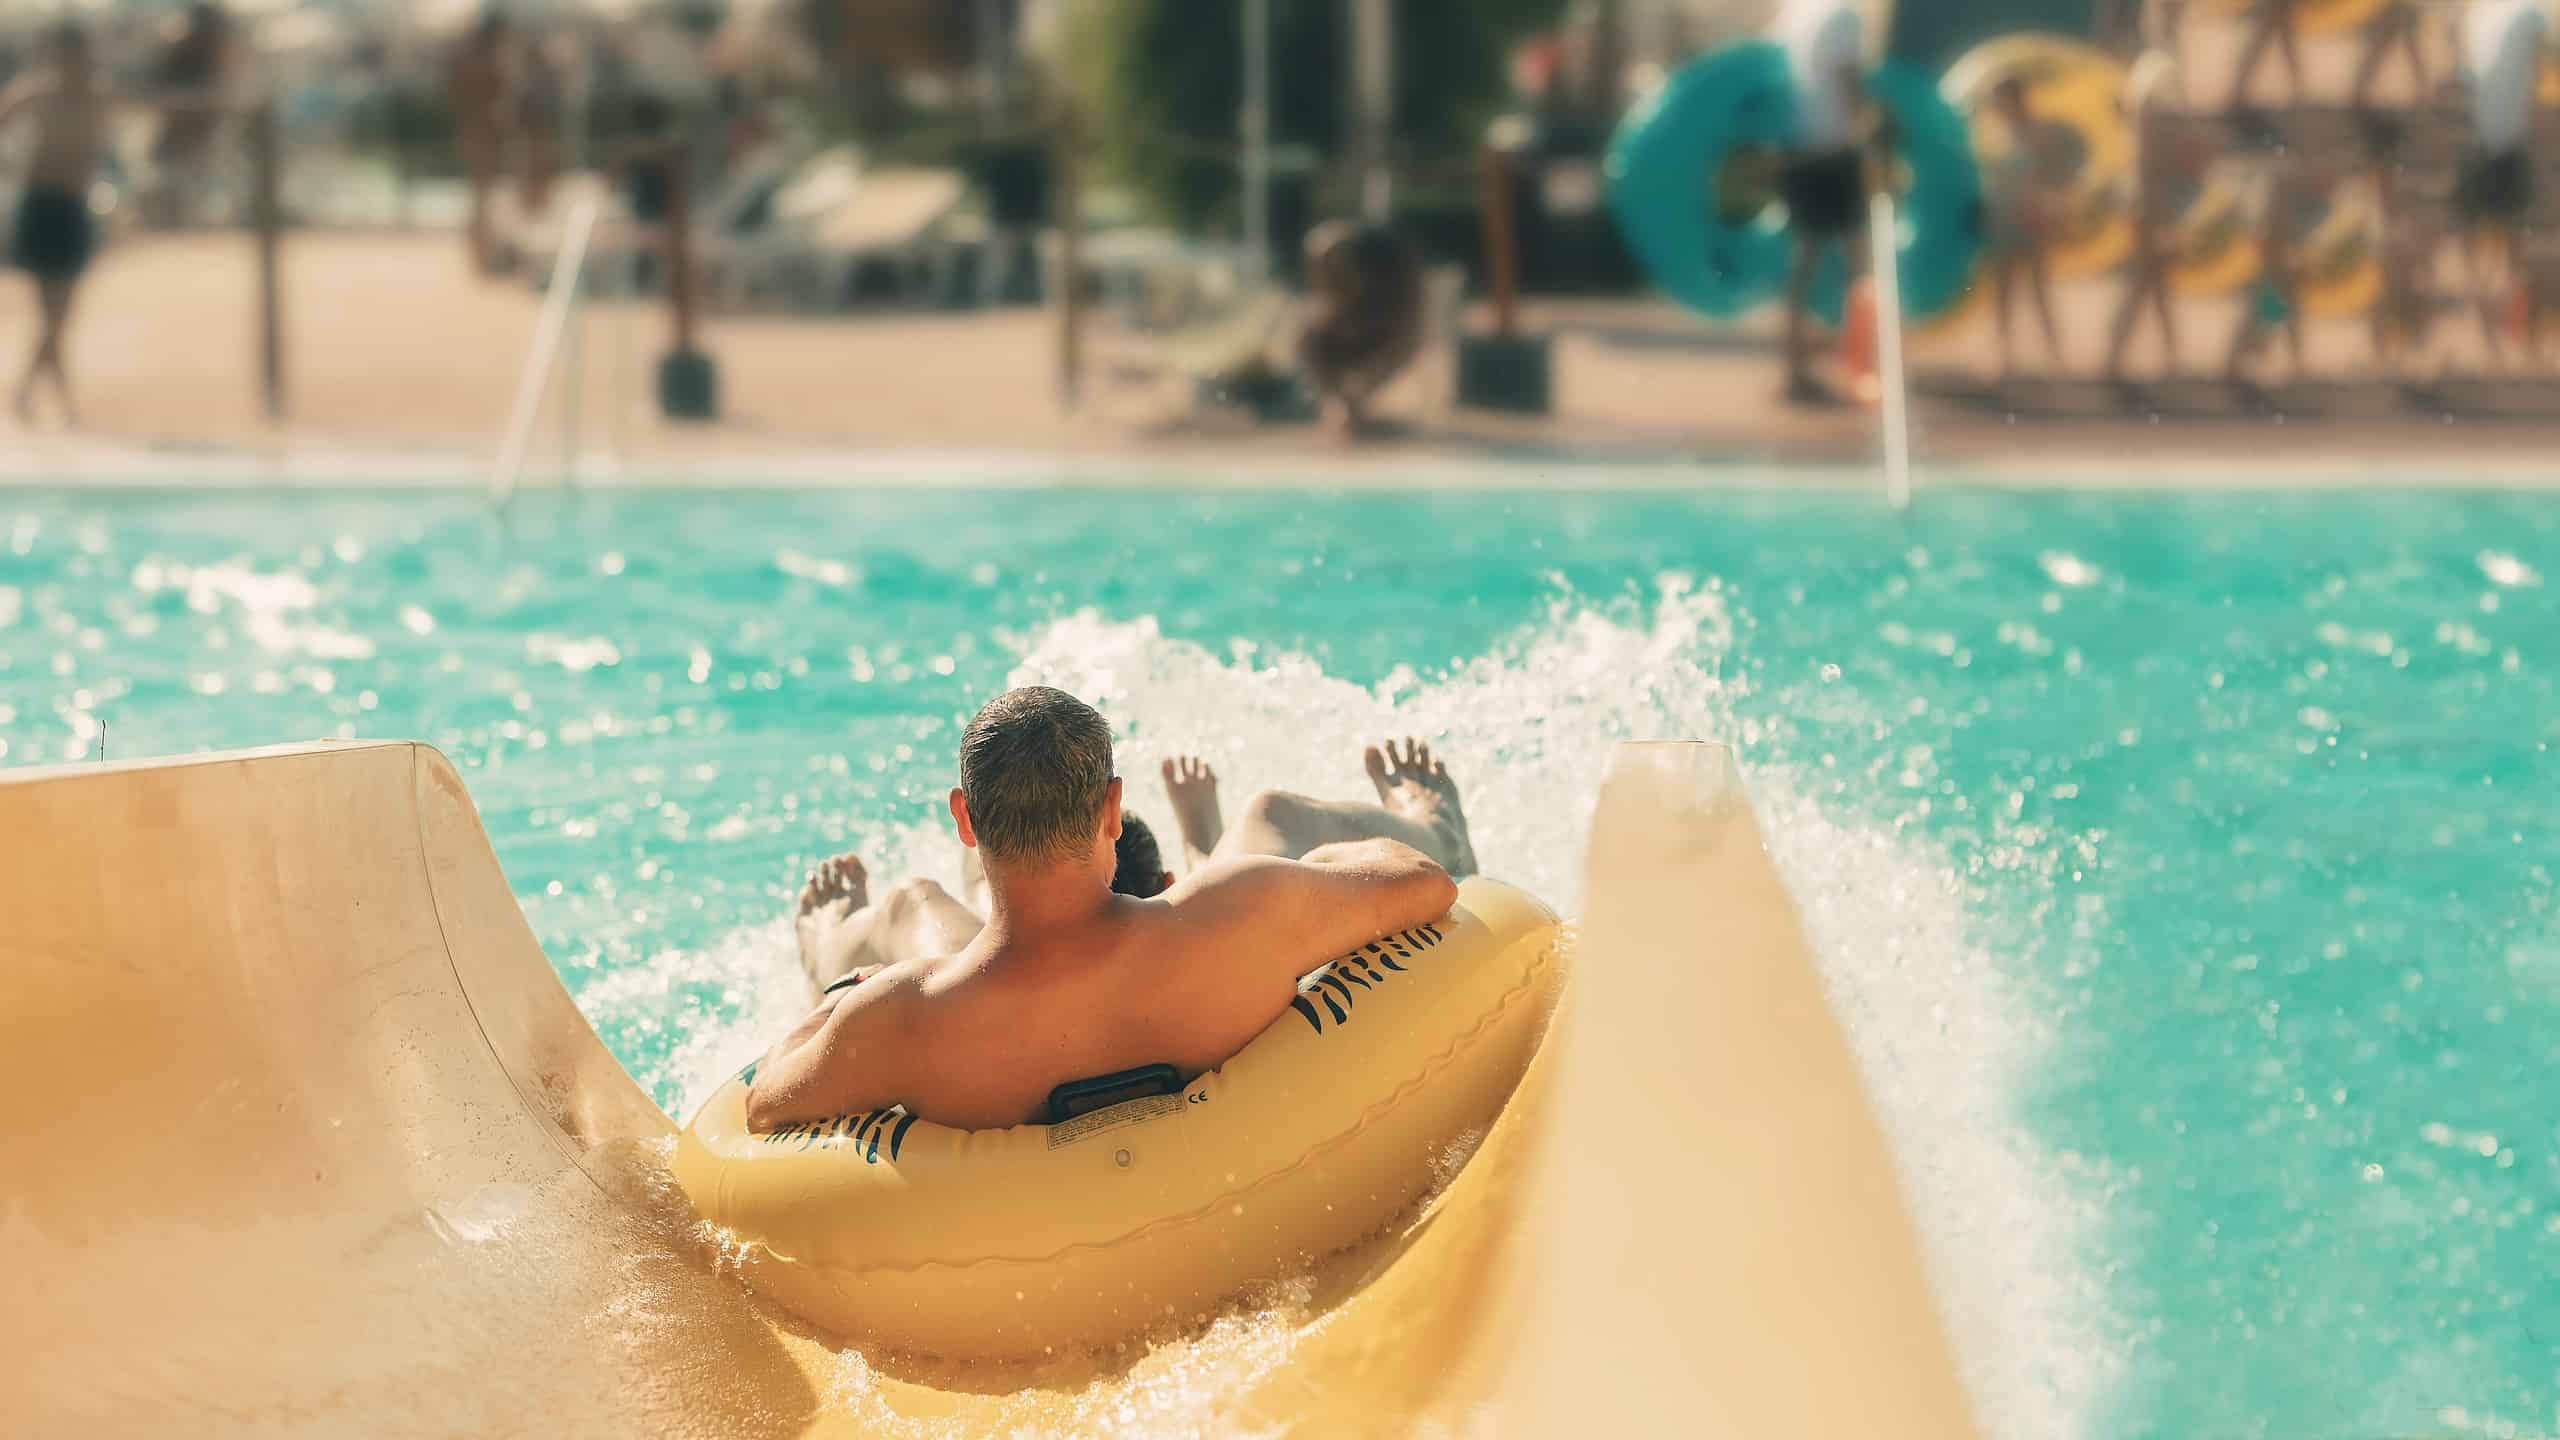 Person in an inner tube sliding down a water slide into a large pool area